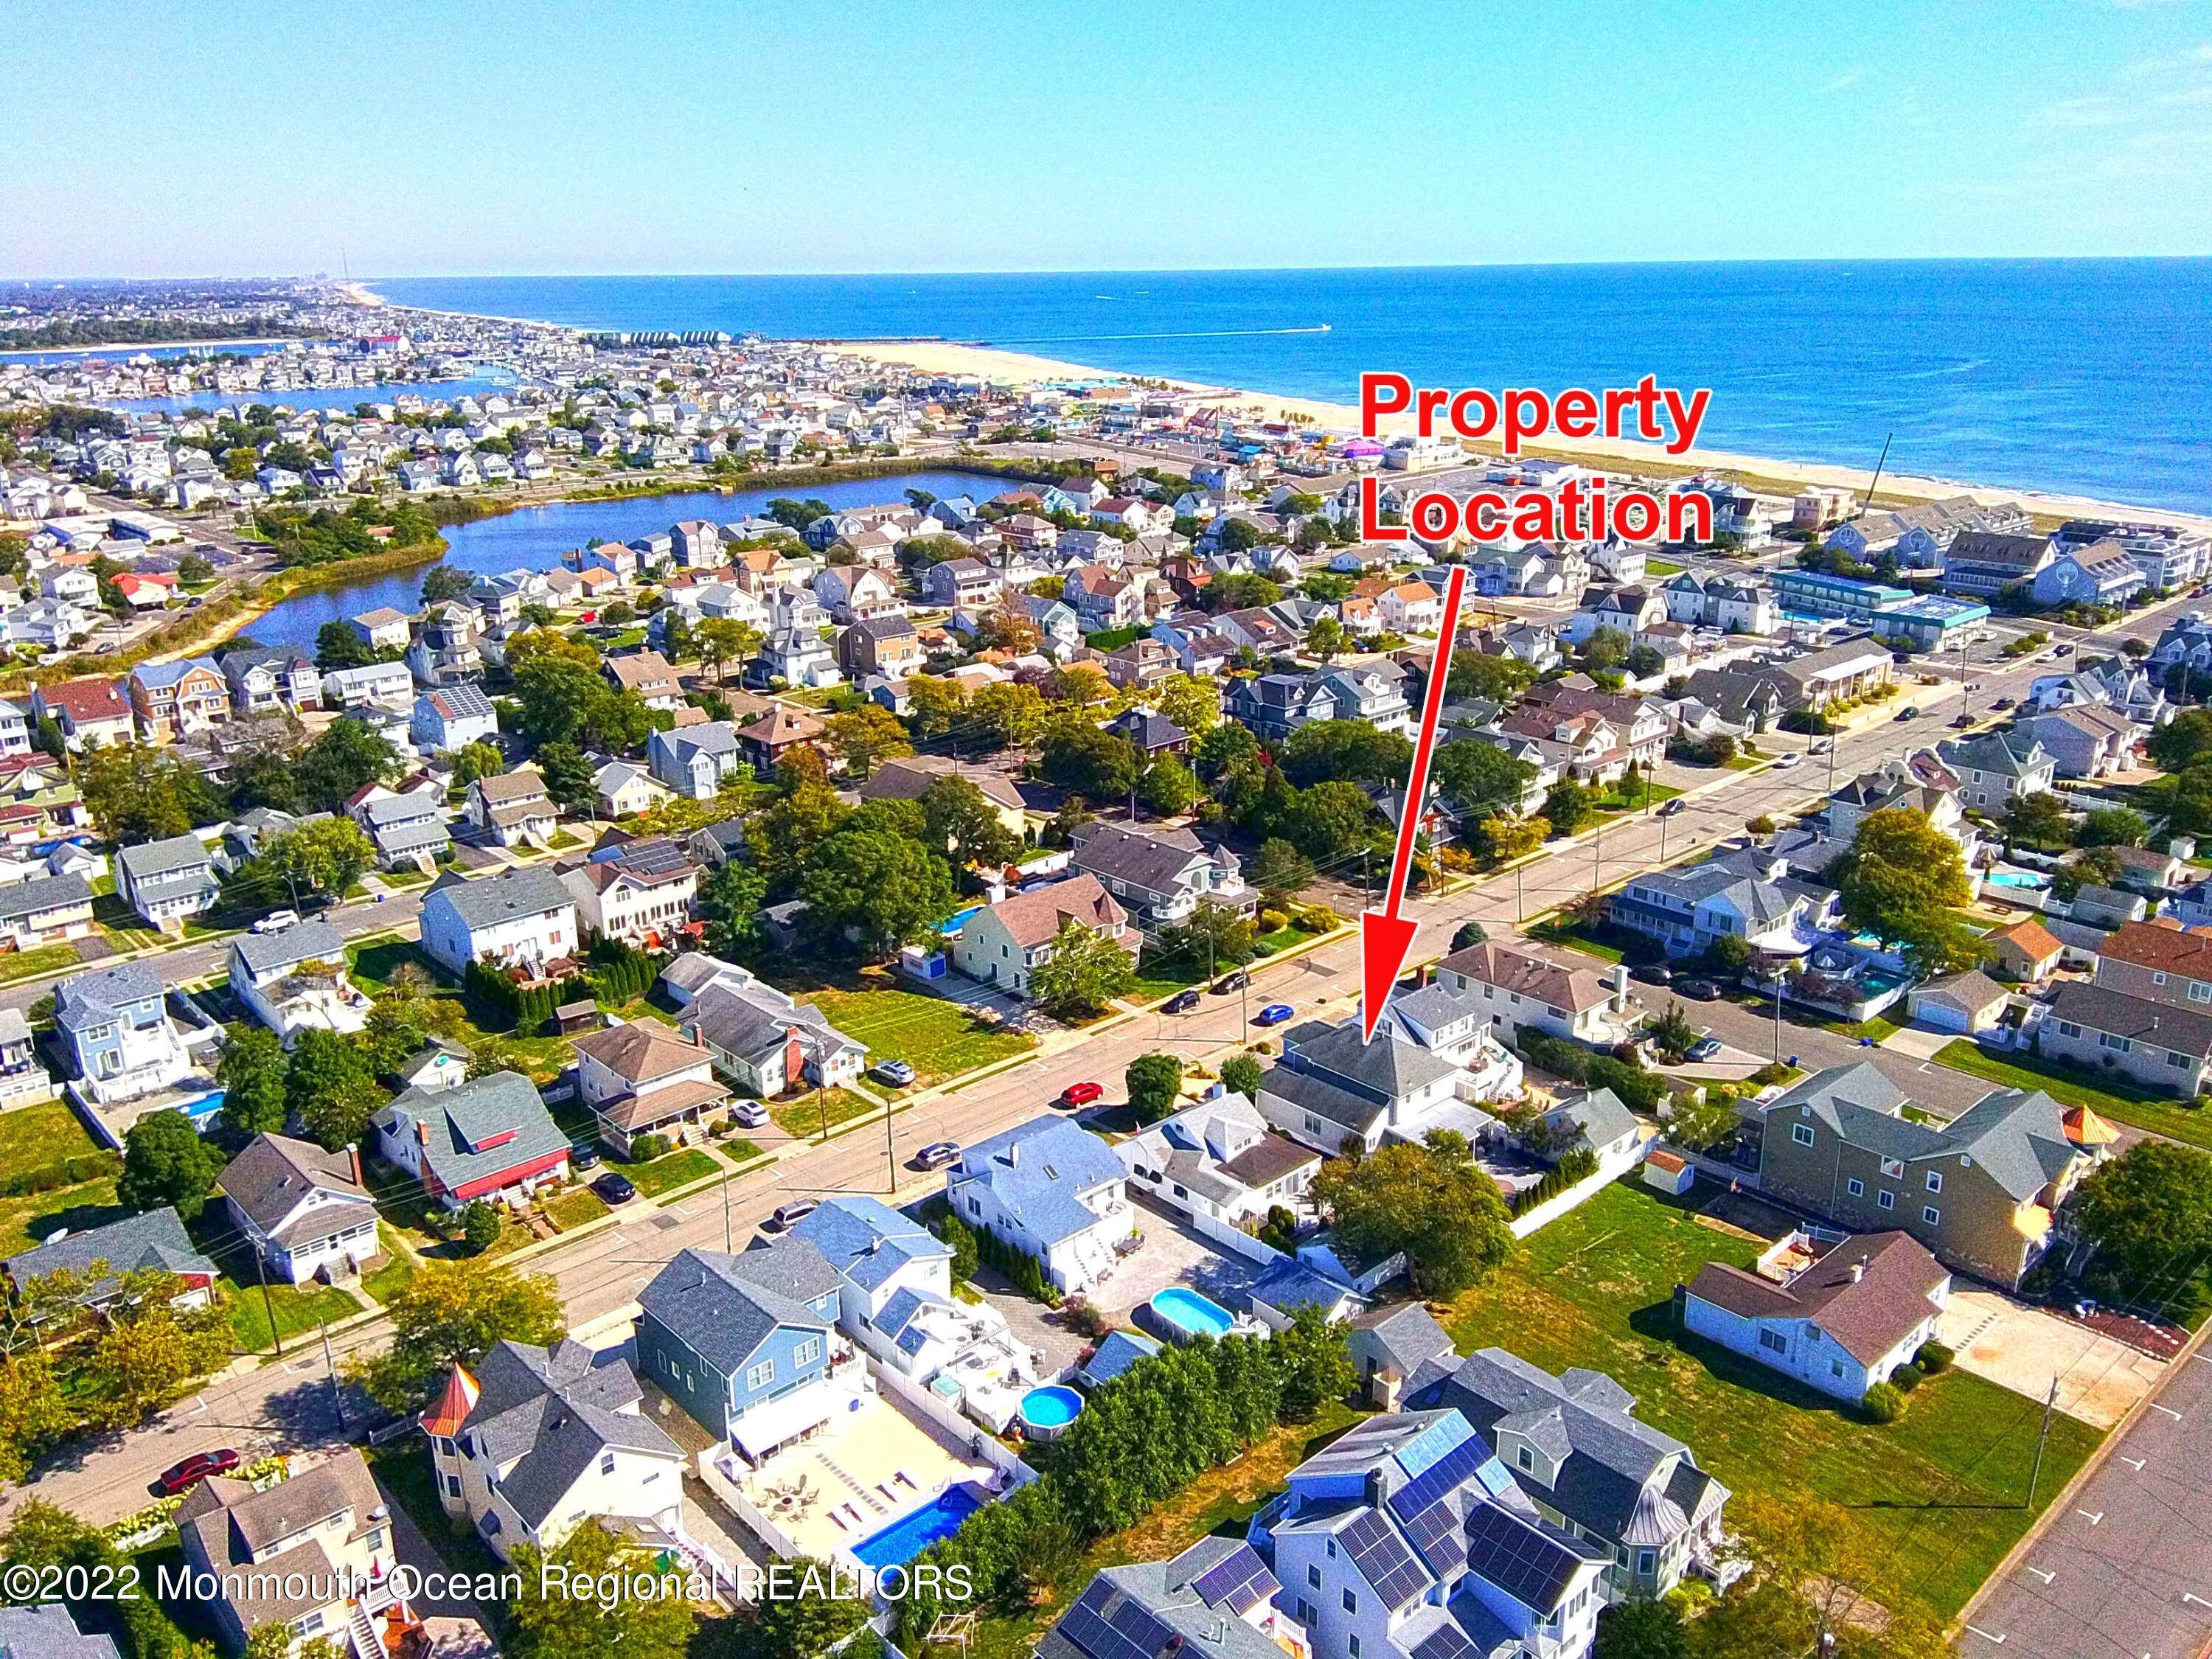 Property for Sale at 204 New Jersey Avenue Point Pleasant Beach, New Jersey 08742 United States